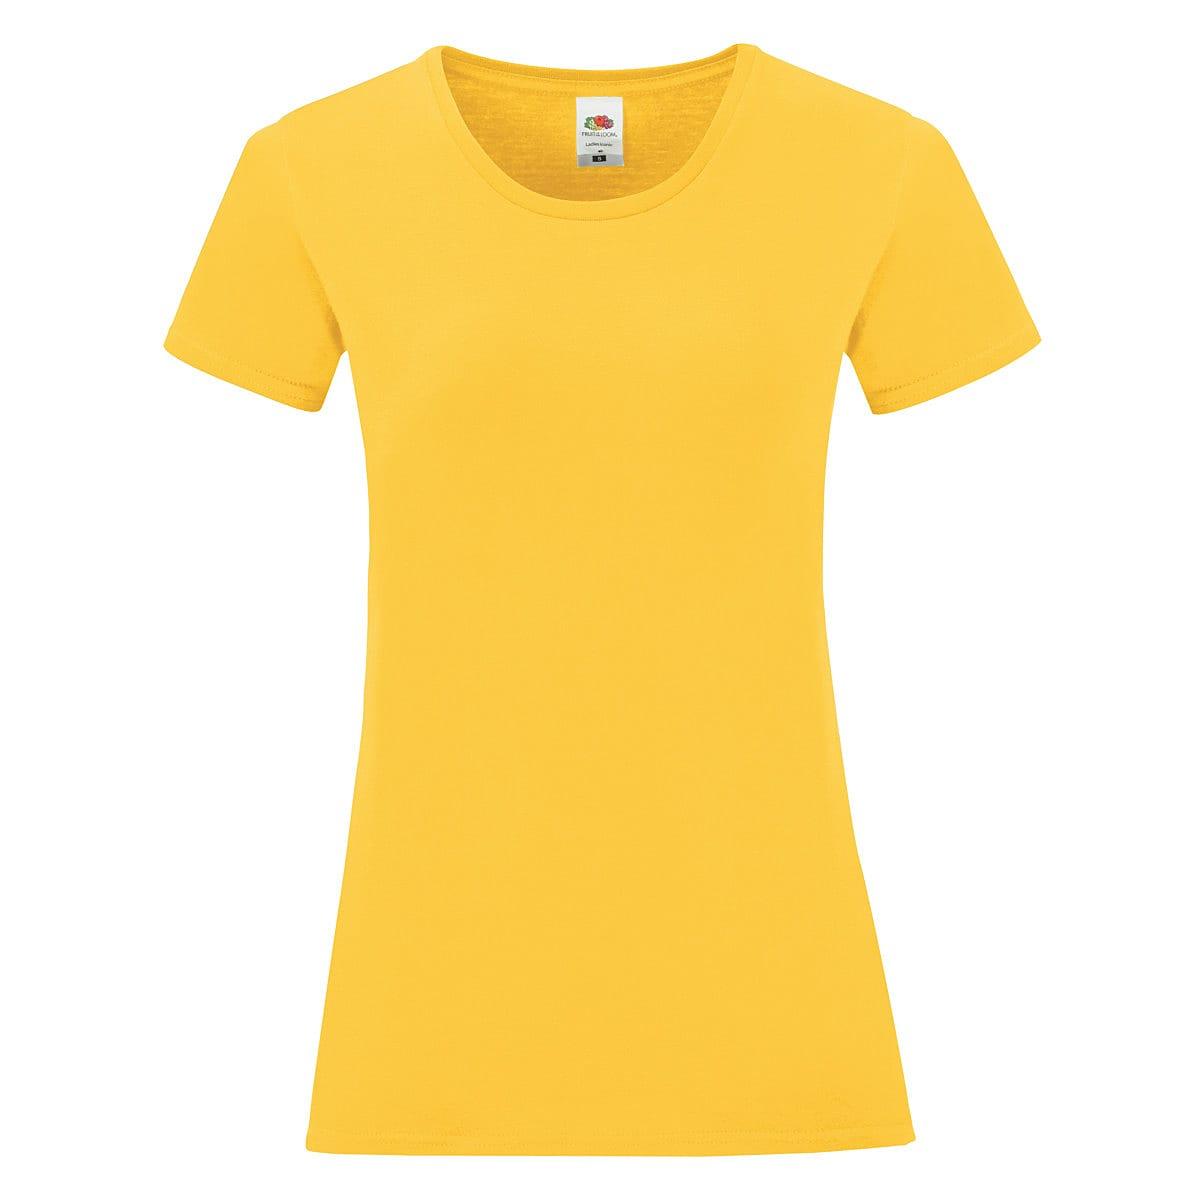 Fruit Of The Loom Womens Iconic T-Shirt in Sunflower (Product Code: 61432)